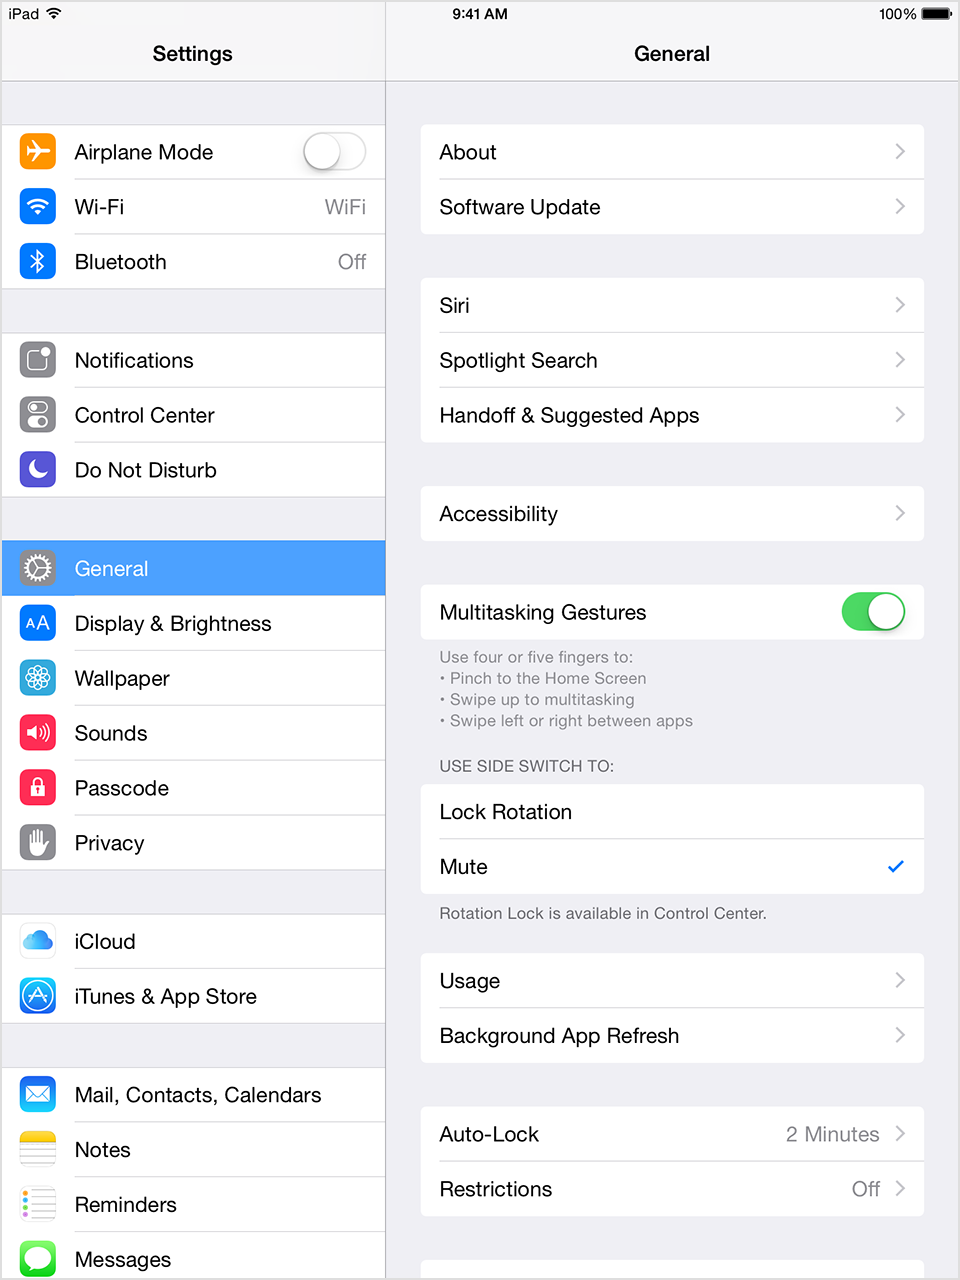 Easy guide to setting up Parental Controls (Restrictions) on your iPad